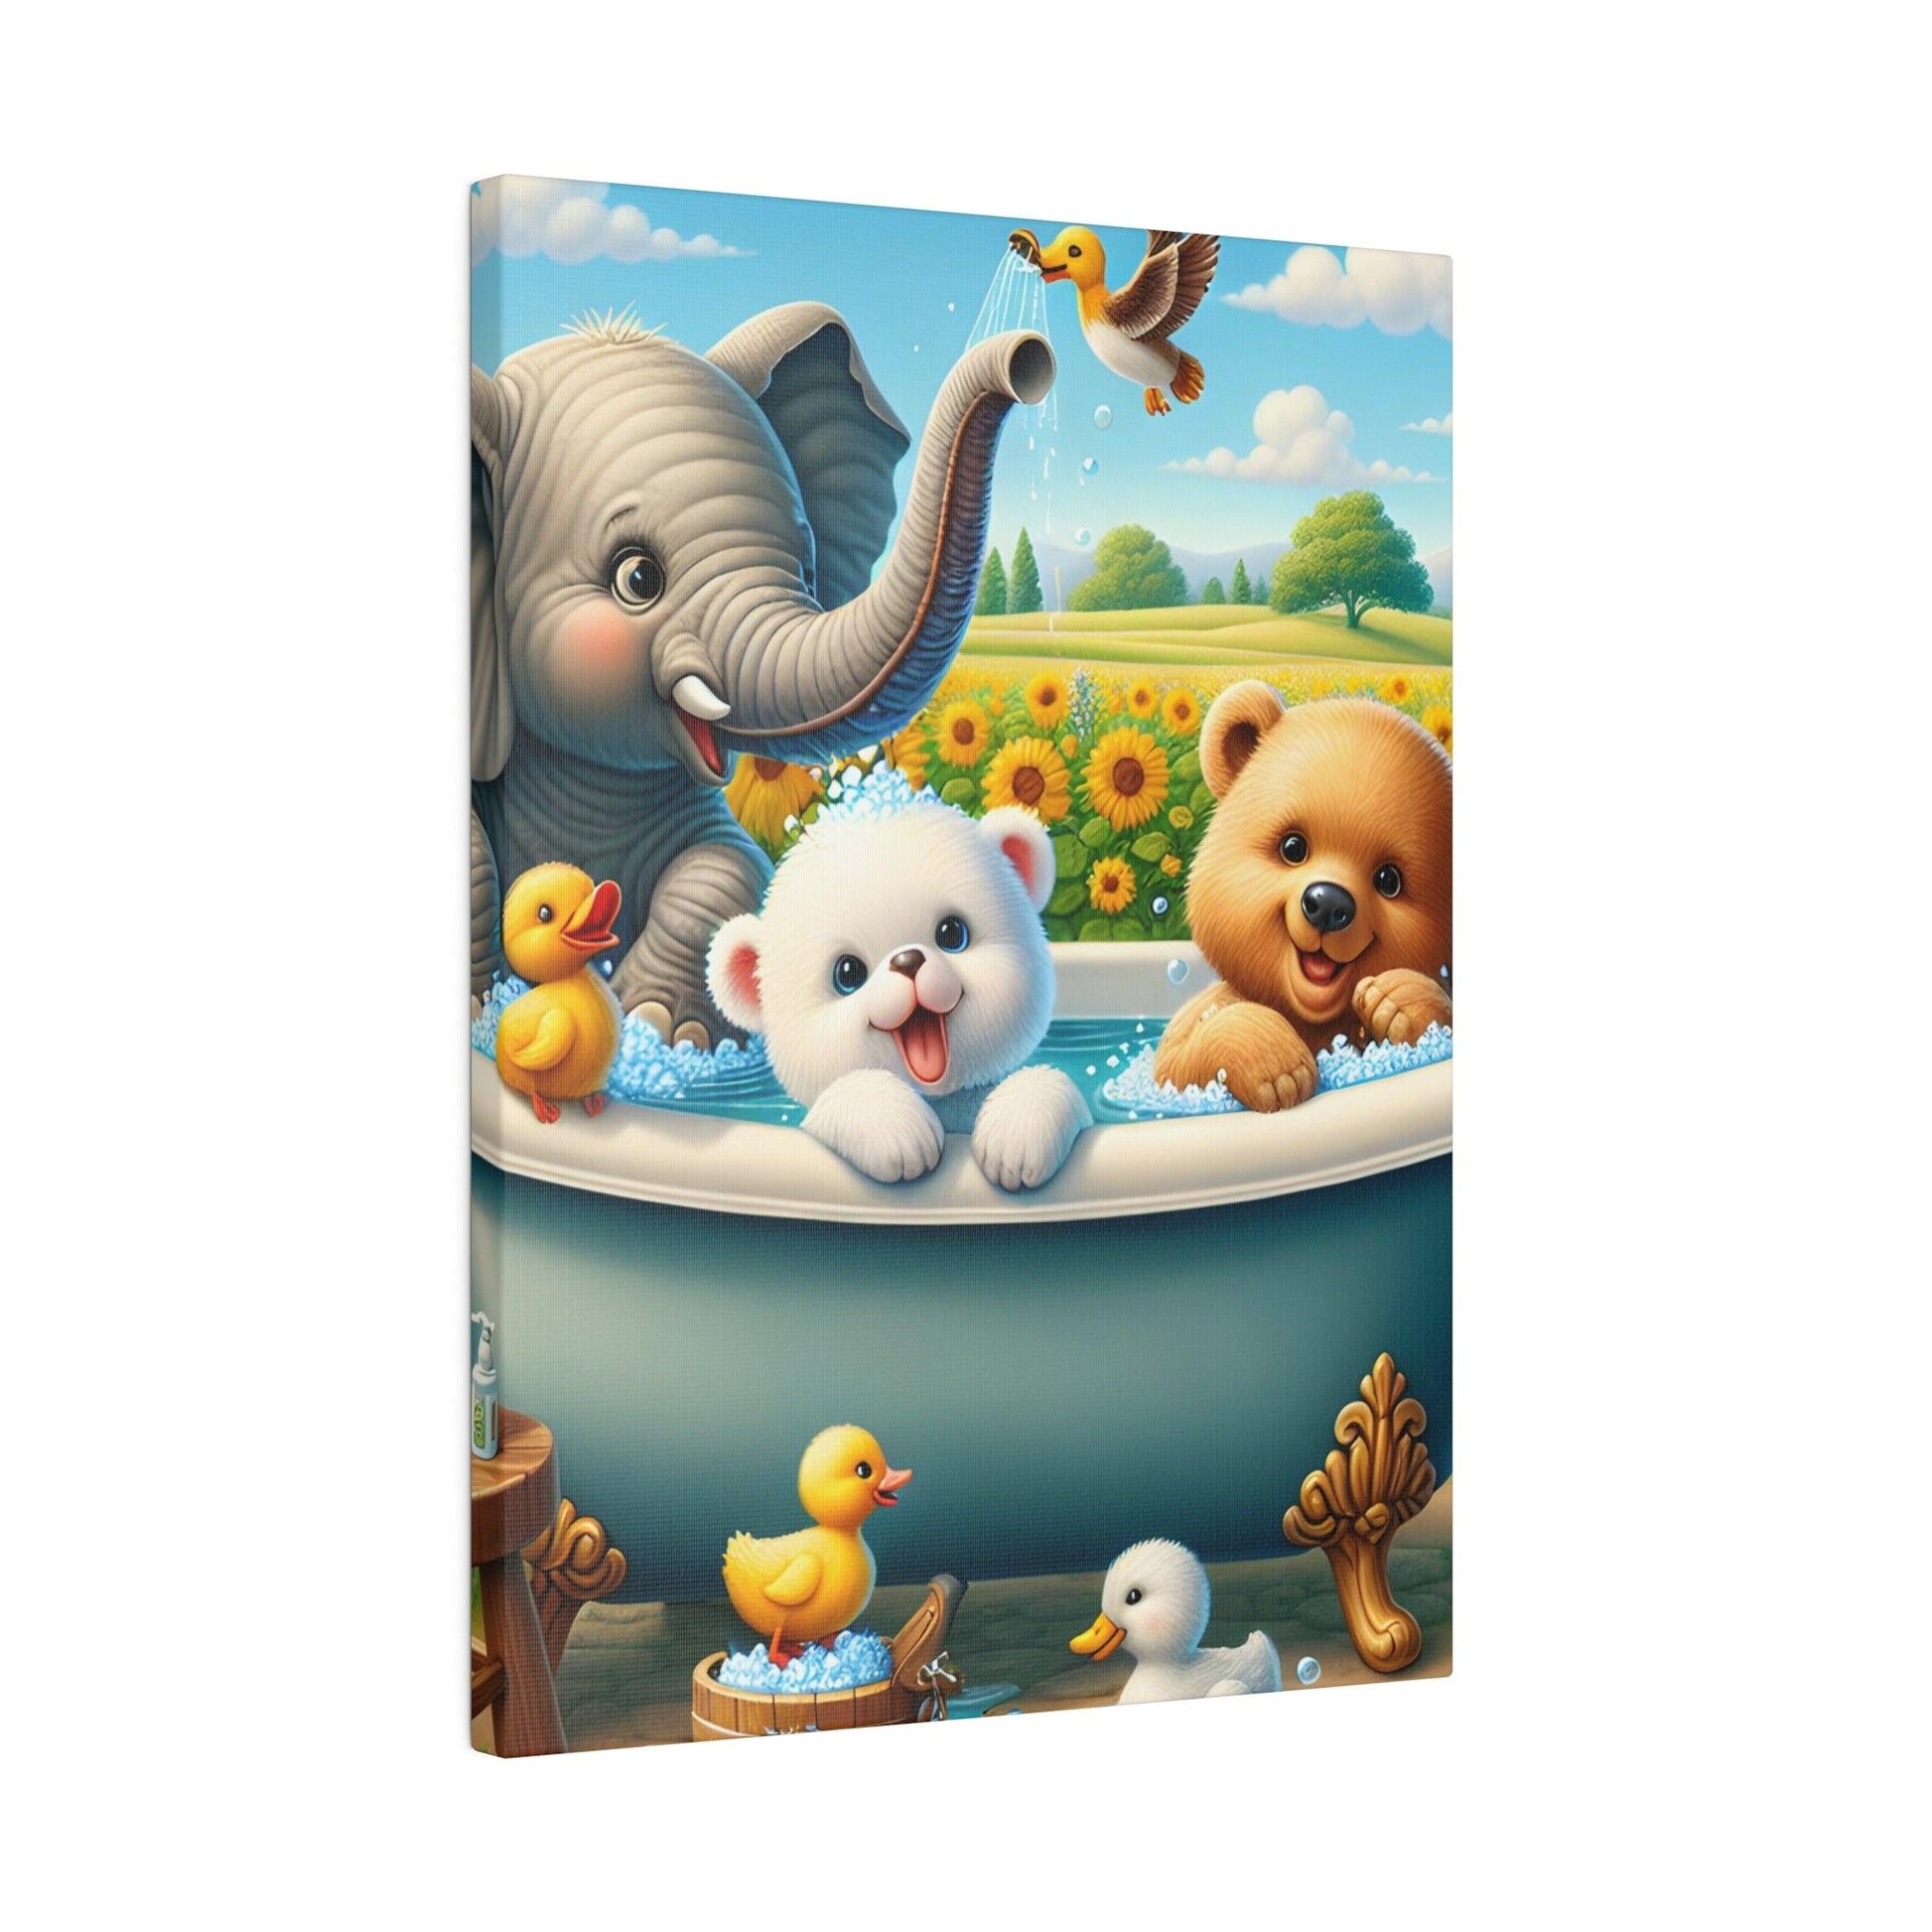 "Bubbles & Beasts: Animals in Bathtub Canvas Wall Art" - The Alice Gallery